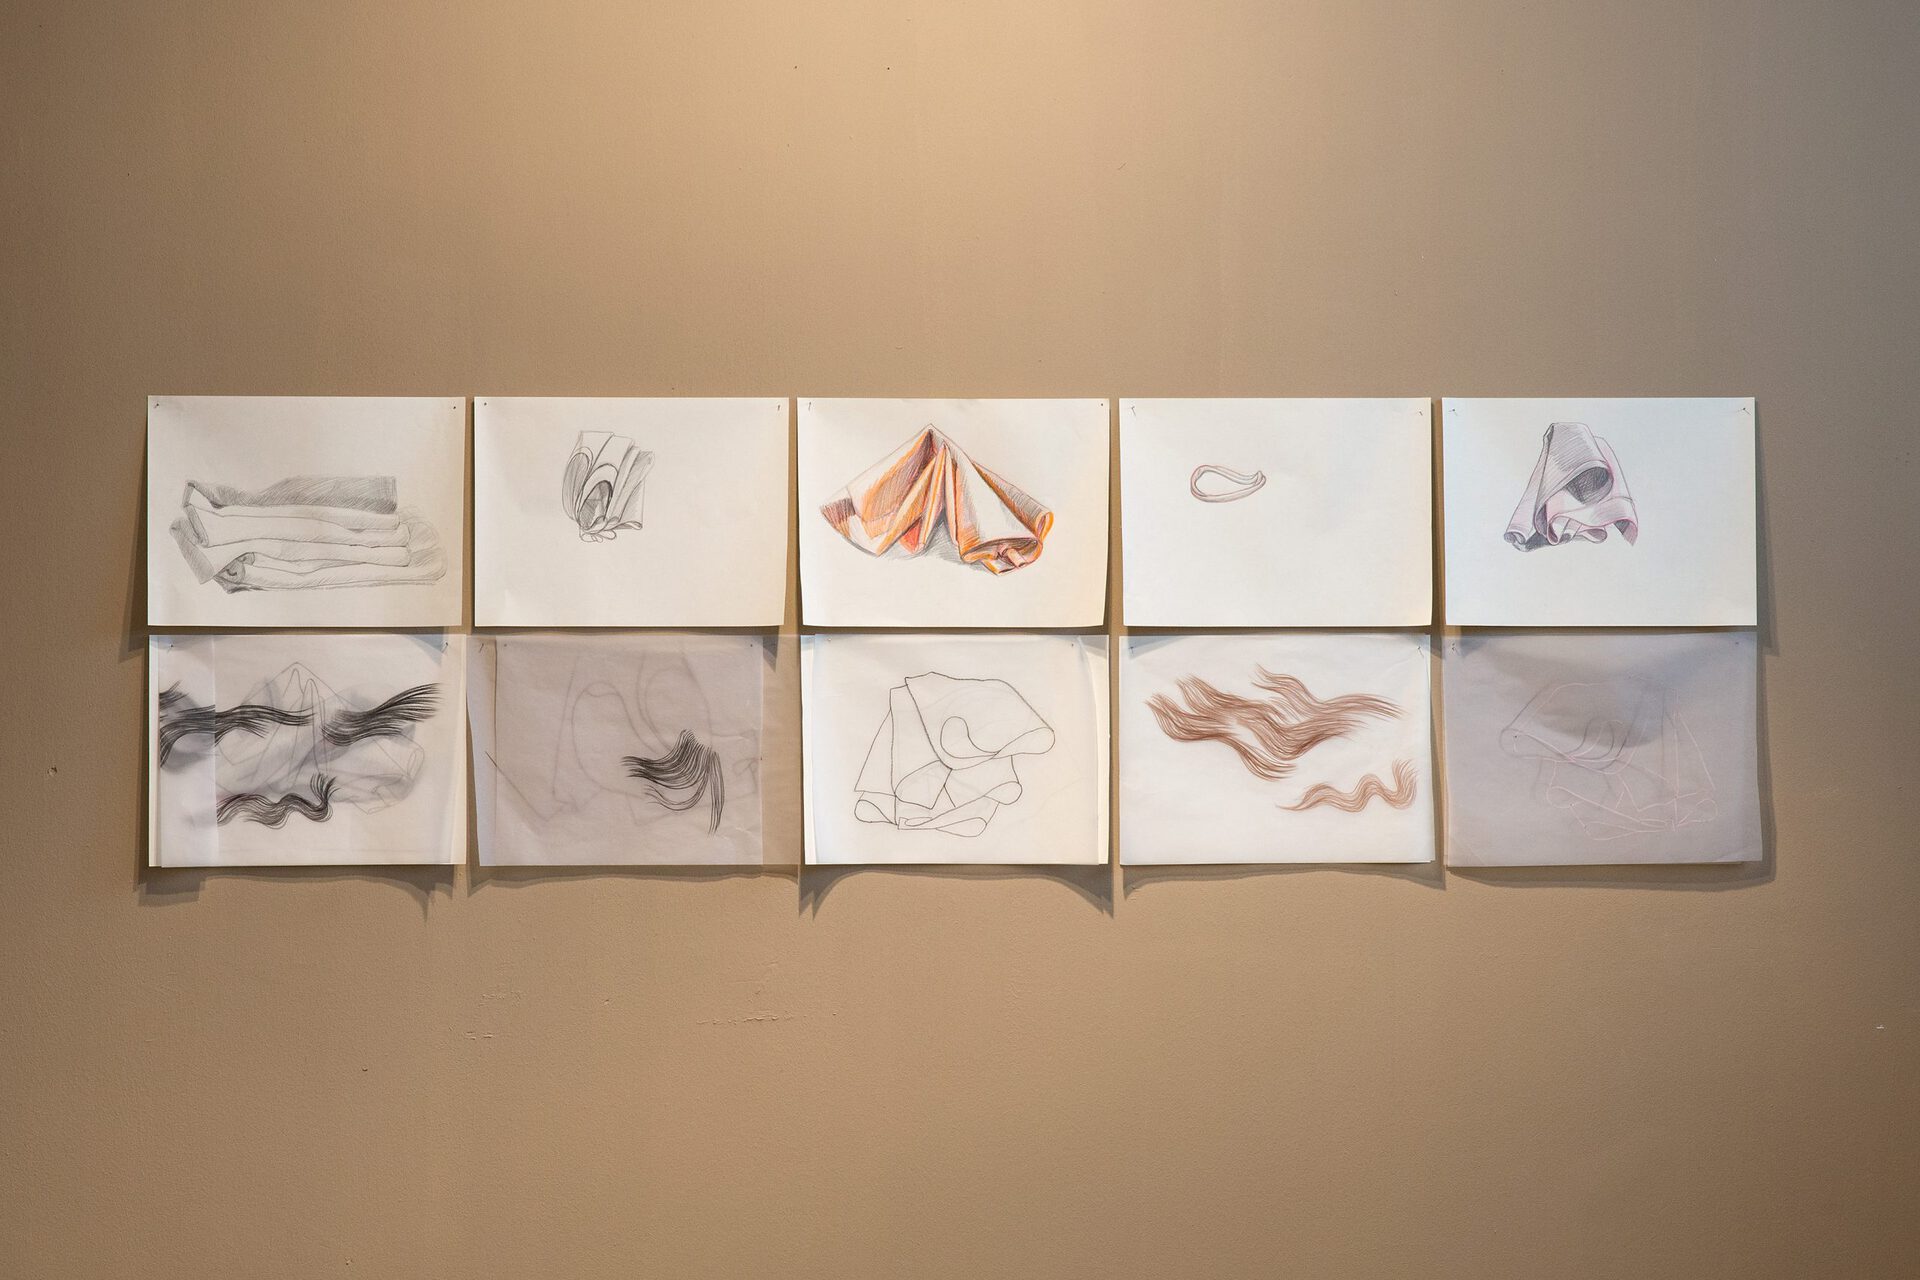 Laura Põld, In a silent room: On some things that live among us, 2020. Drawings on paper